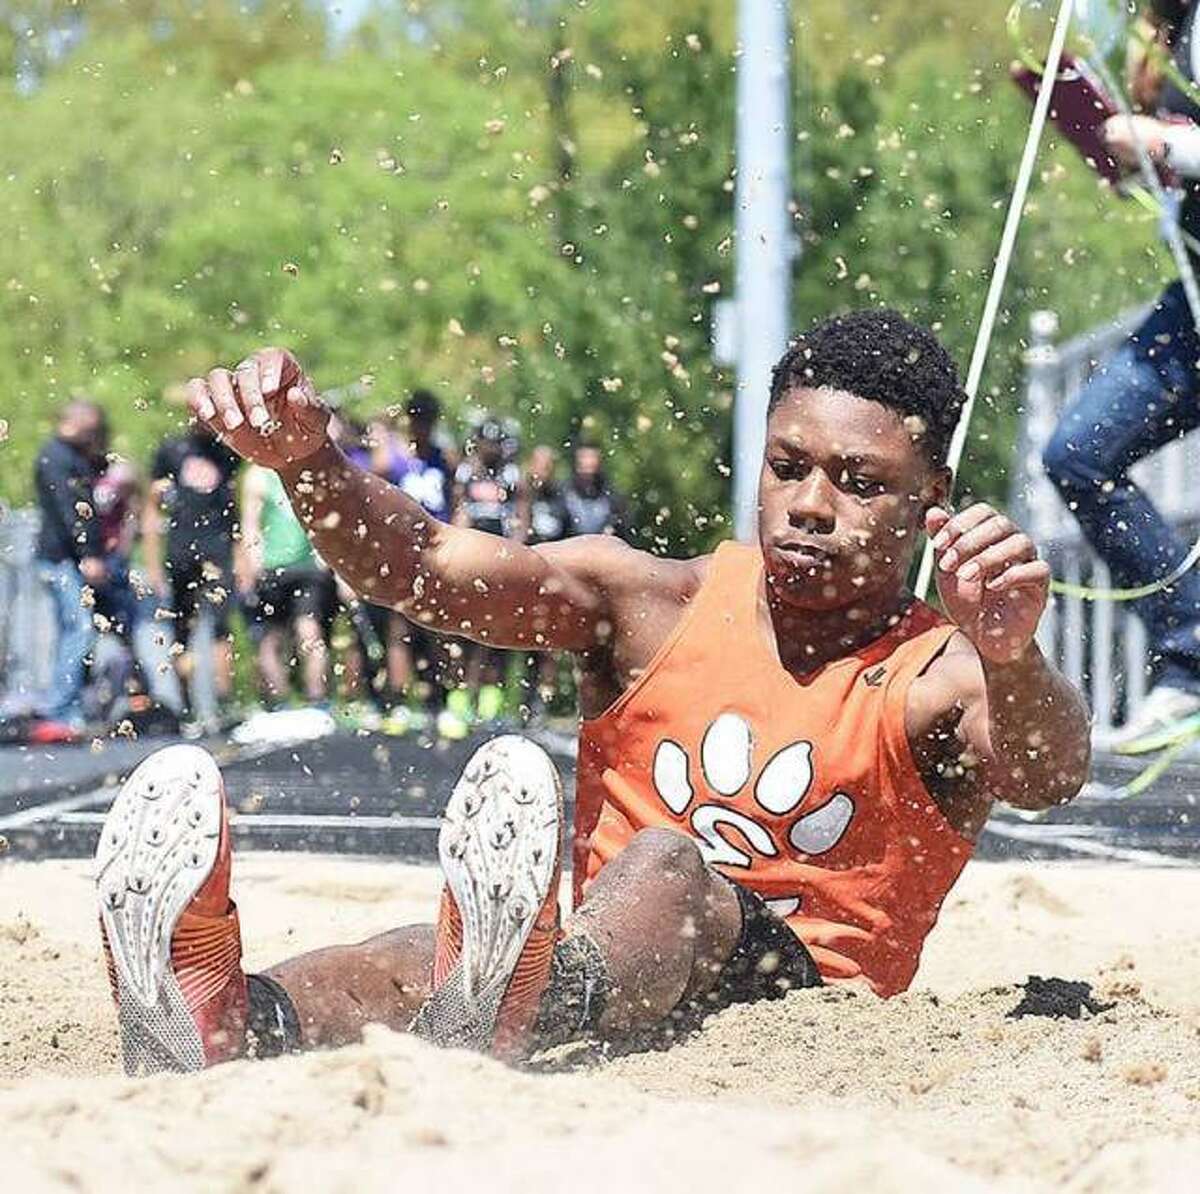 It’s hard to pick against a state champion in Fontez Davis, who won the long jump his senior season in 2015, but Kenyon Johnson owns the program record in the event and was in a good position to challenge for his own state title this season before the coronavirus ended things.